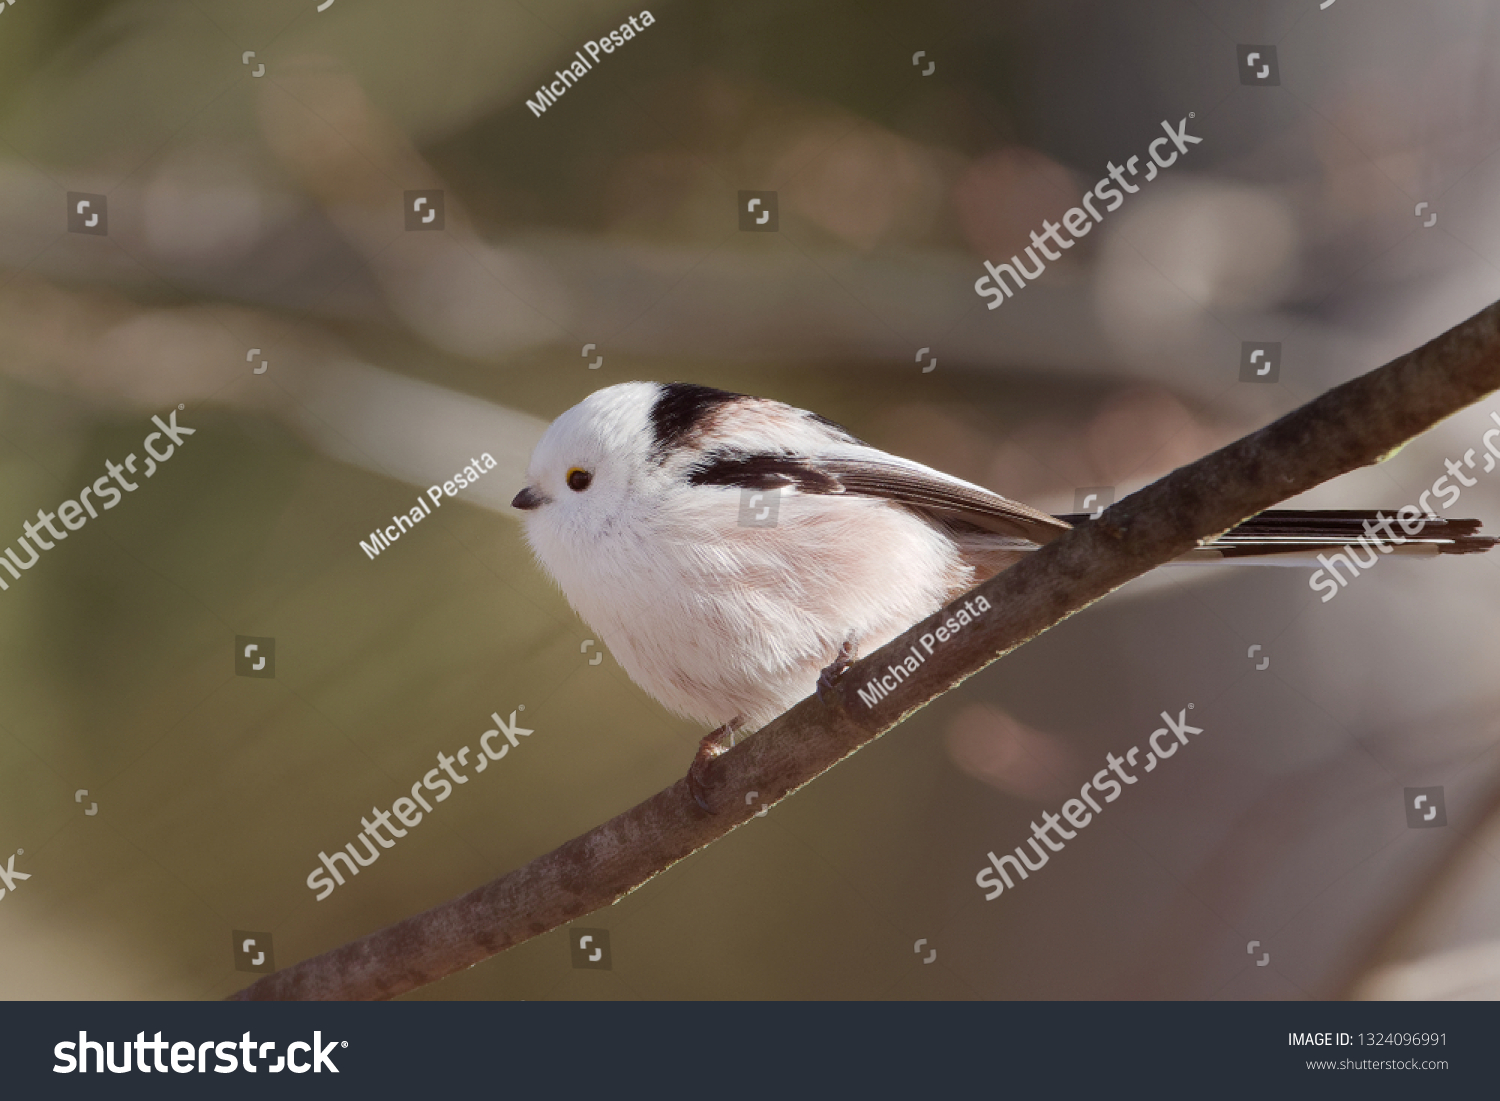 The long-tailed tit or long-tailed bushtit (The long-tailed tit or long-tailed bushtit (Aegithalos caudatus) is a common bird found throughout Europe and Asia) is a common bird found throughout Europe #1324096991